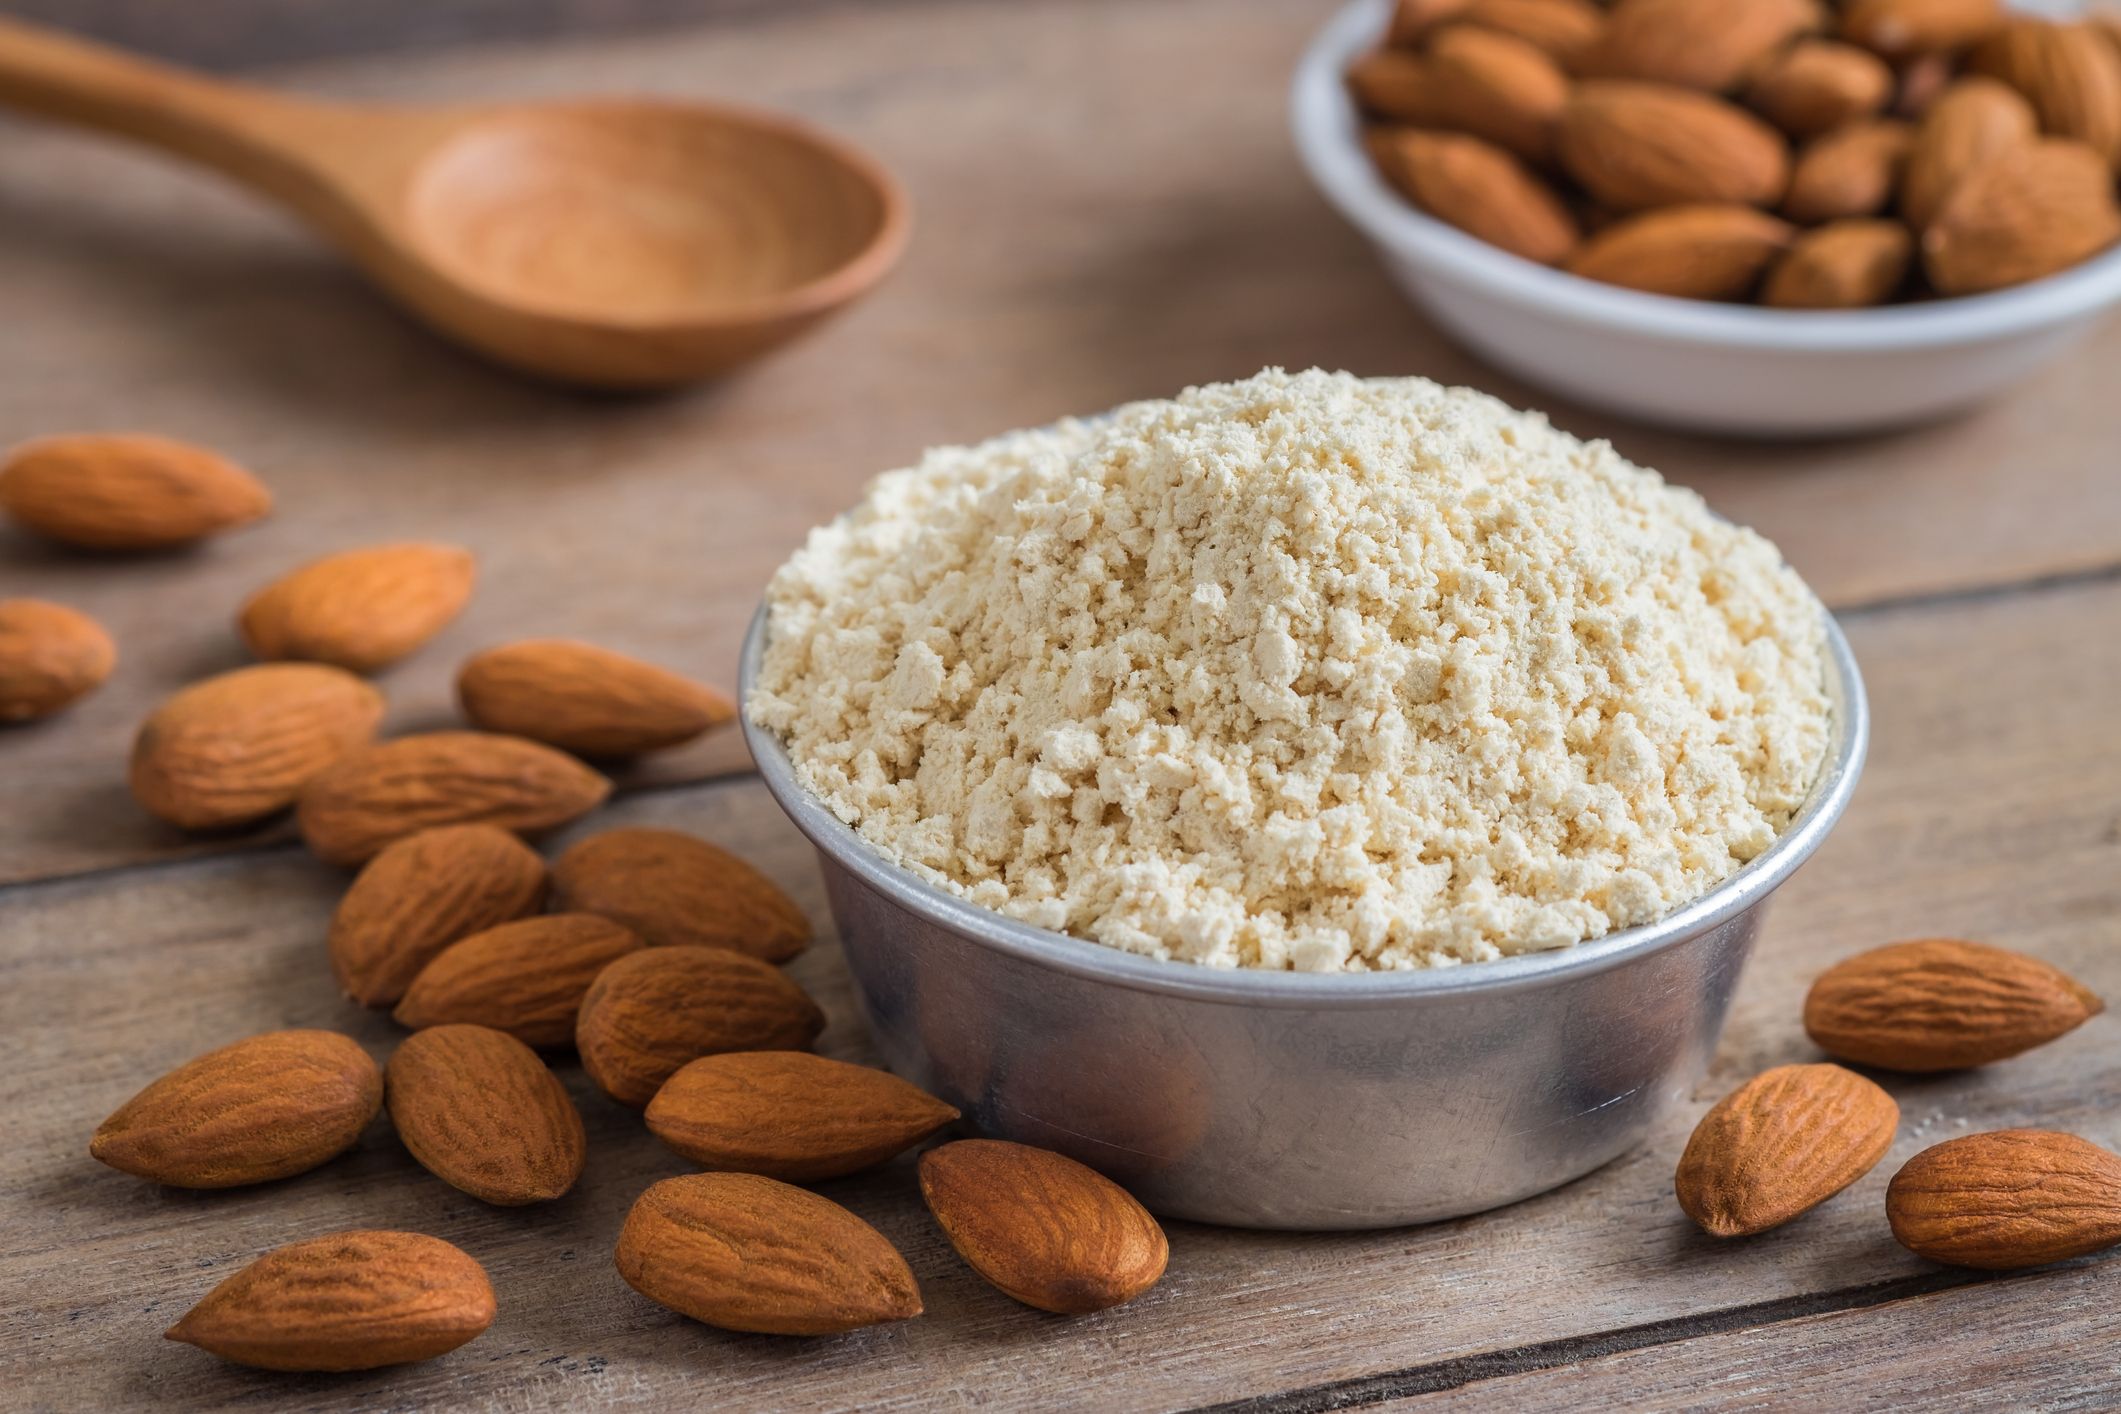 How many calories and carbs are in 1 cup of almond flour?